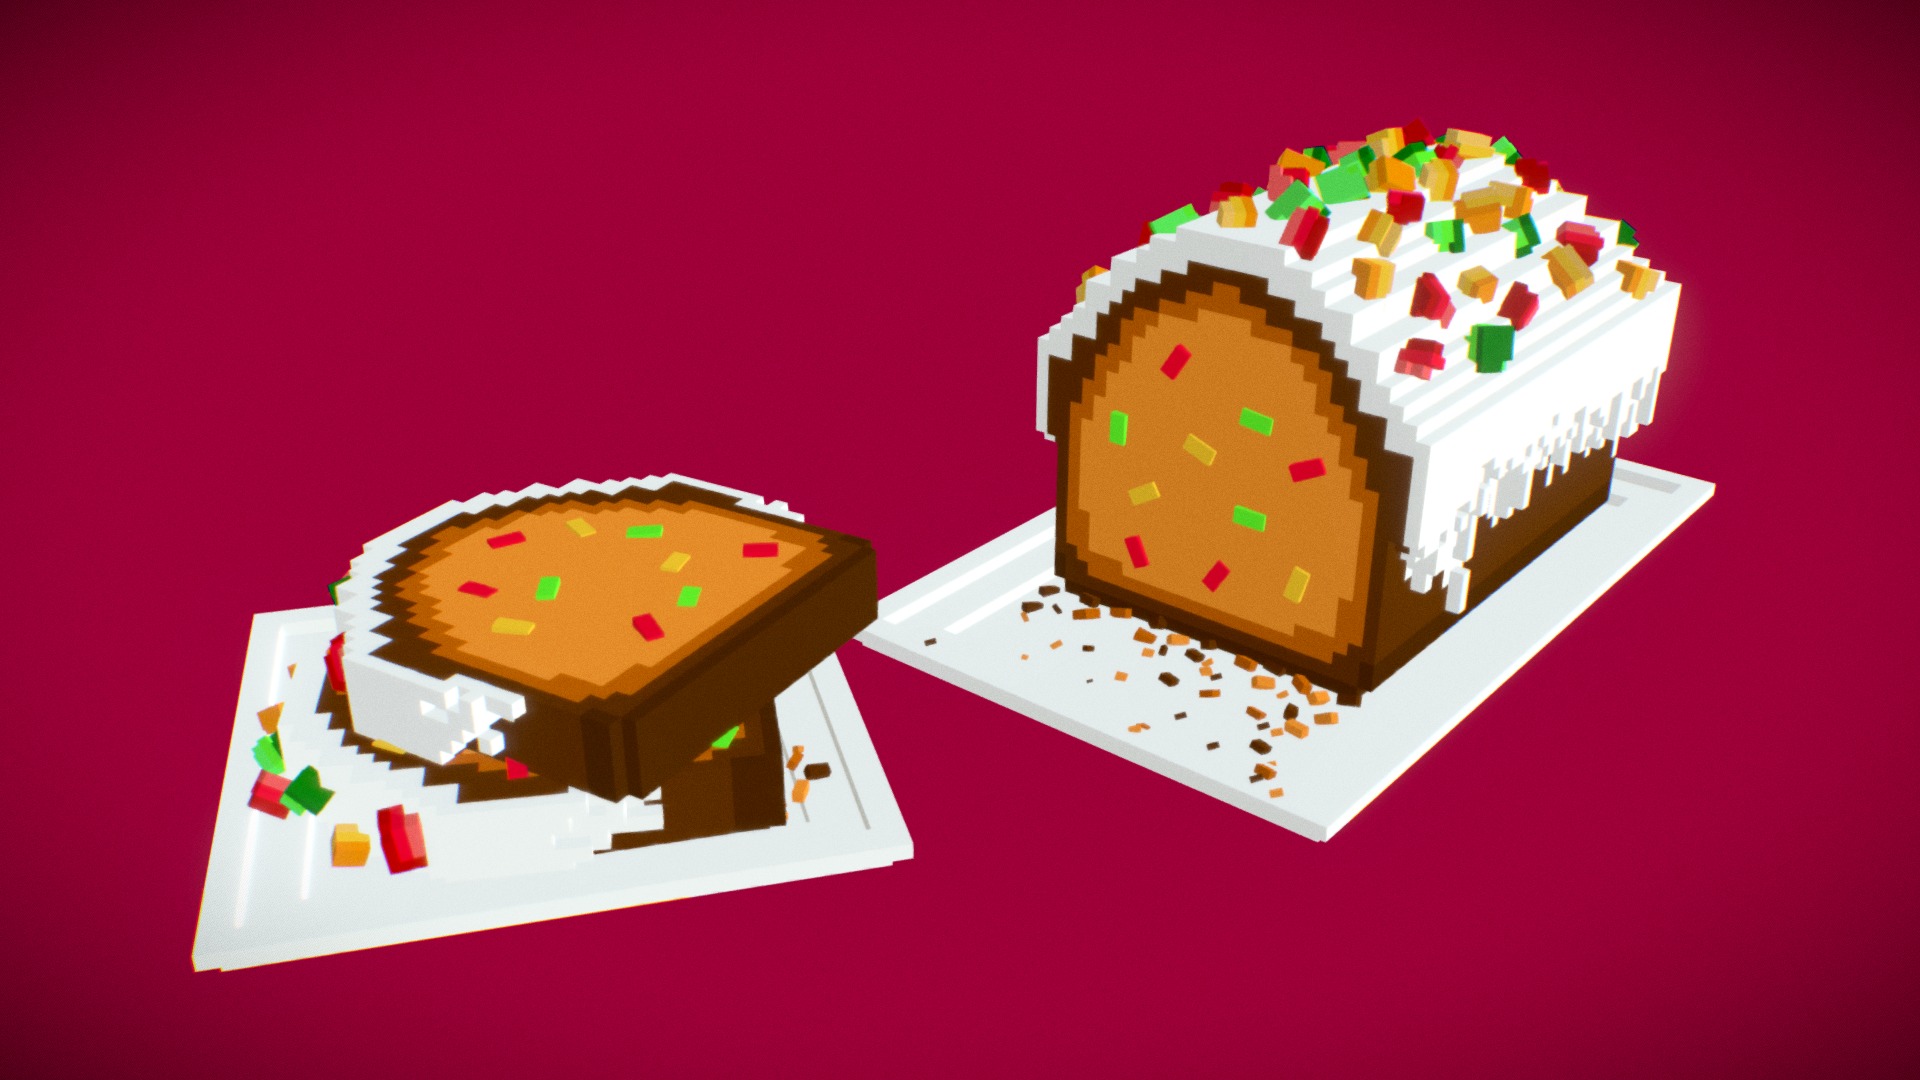 3D model #3December #Day4 Fruitcake for You - This is a 3D model of the #3December #Day4 Fruitcake for You. The 3D model is about a couple of gingerbread houses.